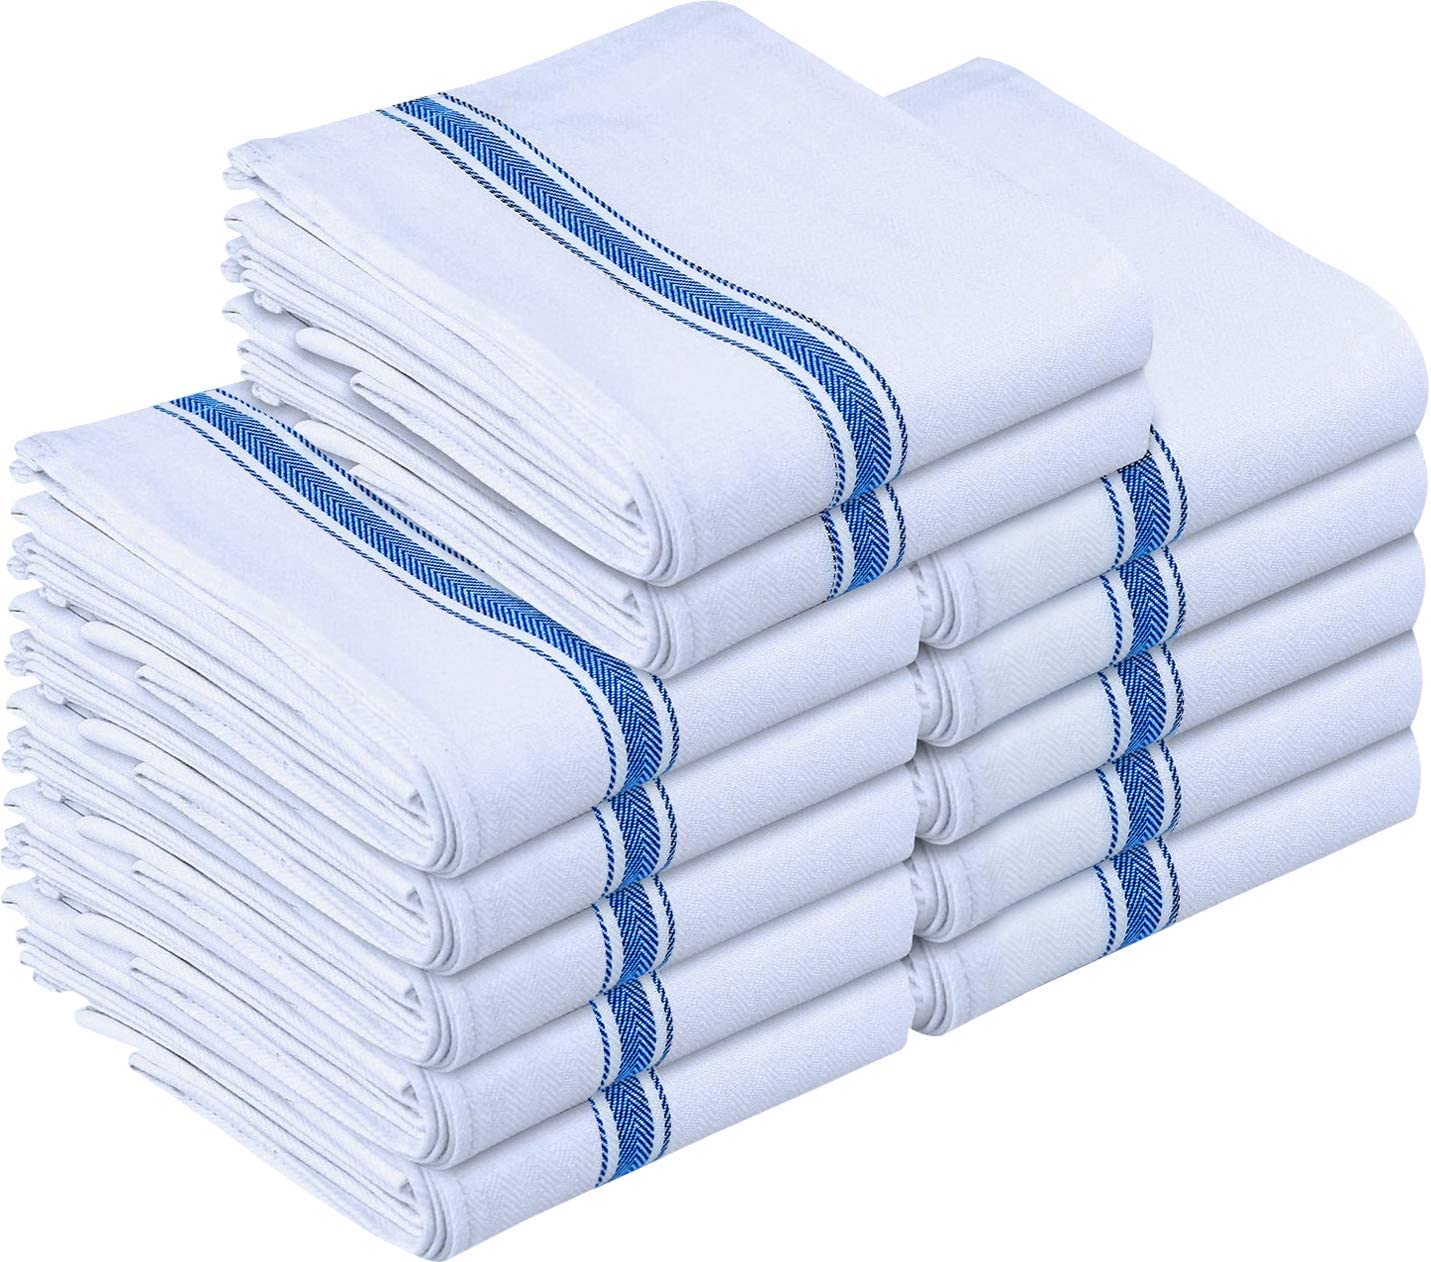 Kitchen Dish Towels, 100% Natural Cotton, Set of 4, 15x25 in.